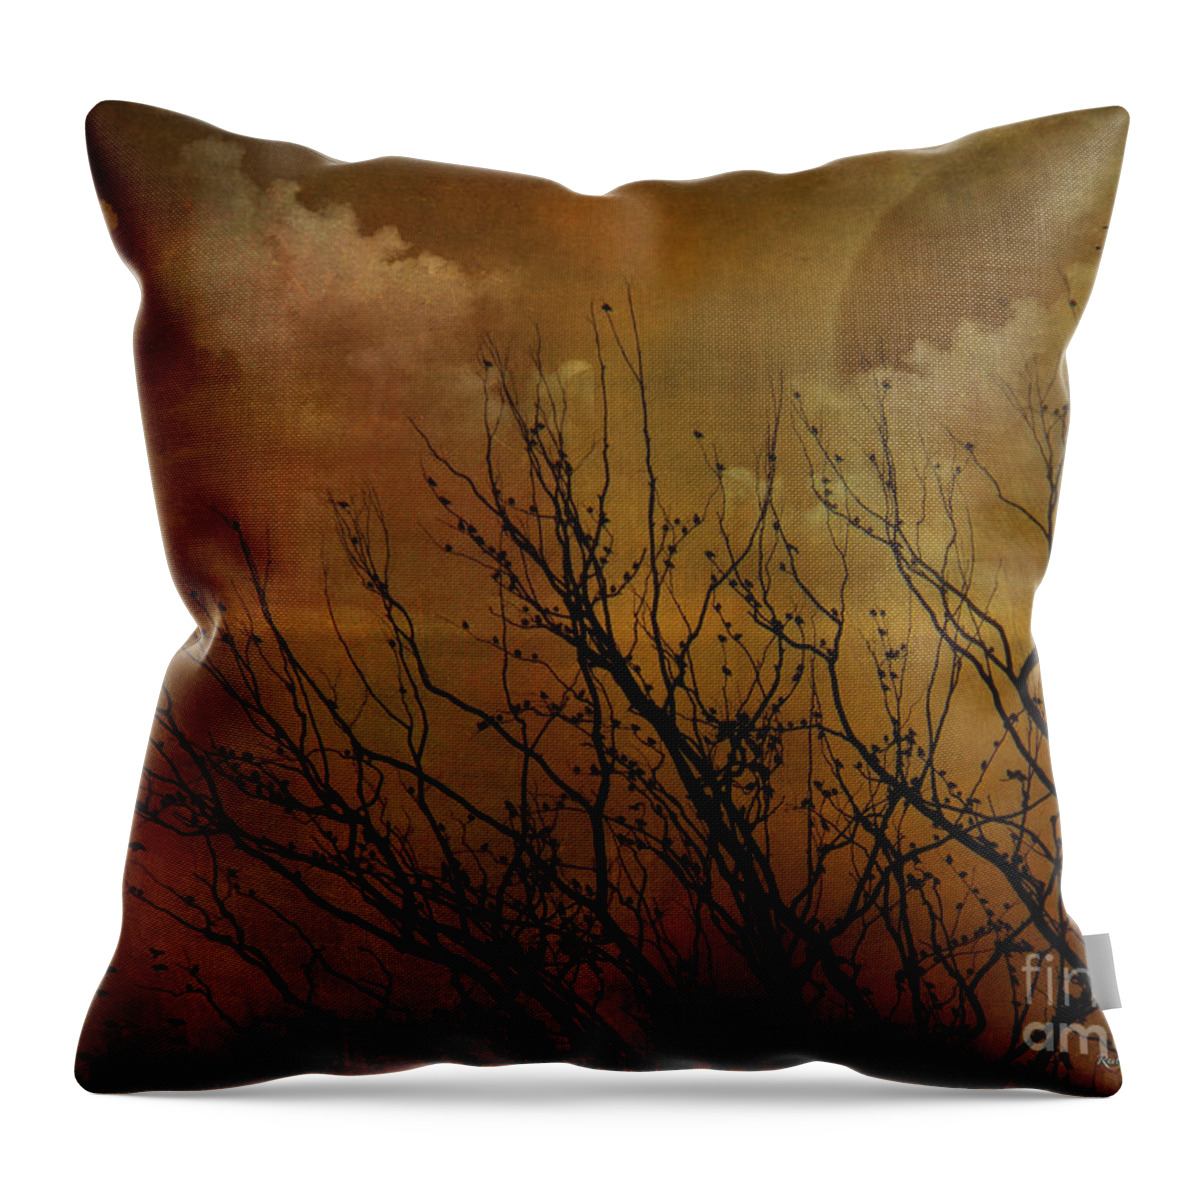 Sun Throw Pillow featuring the digital art At End of Day III by Rhonda Strickland